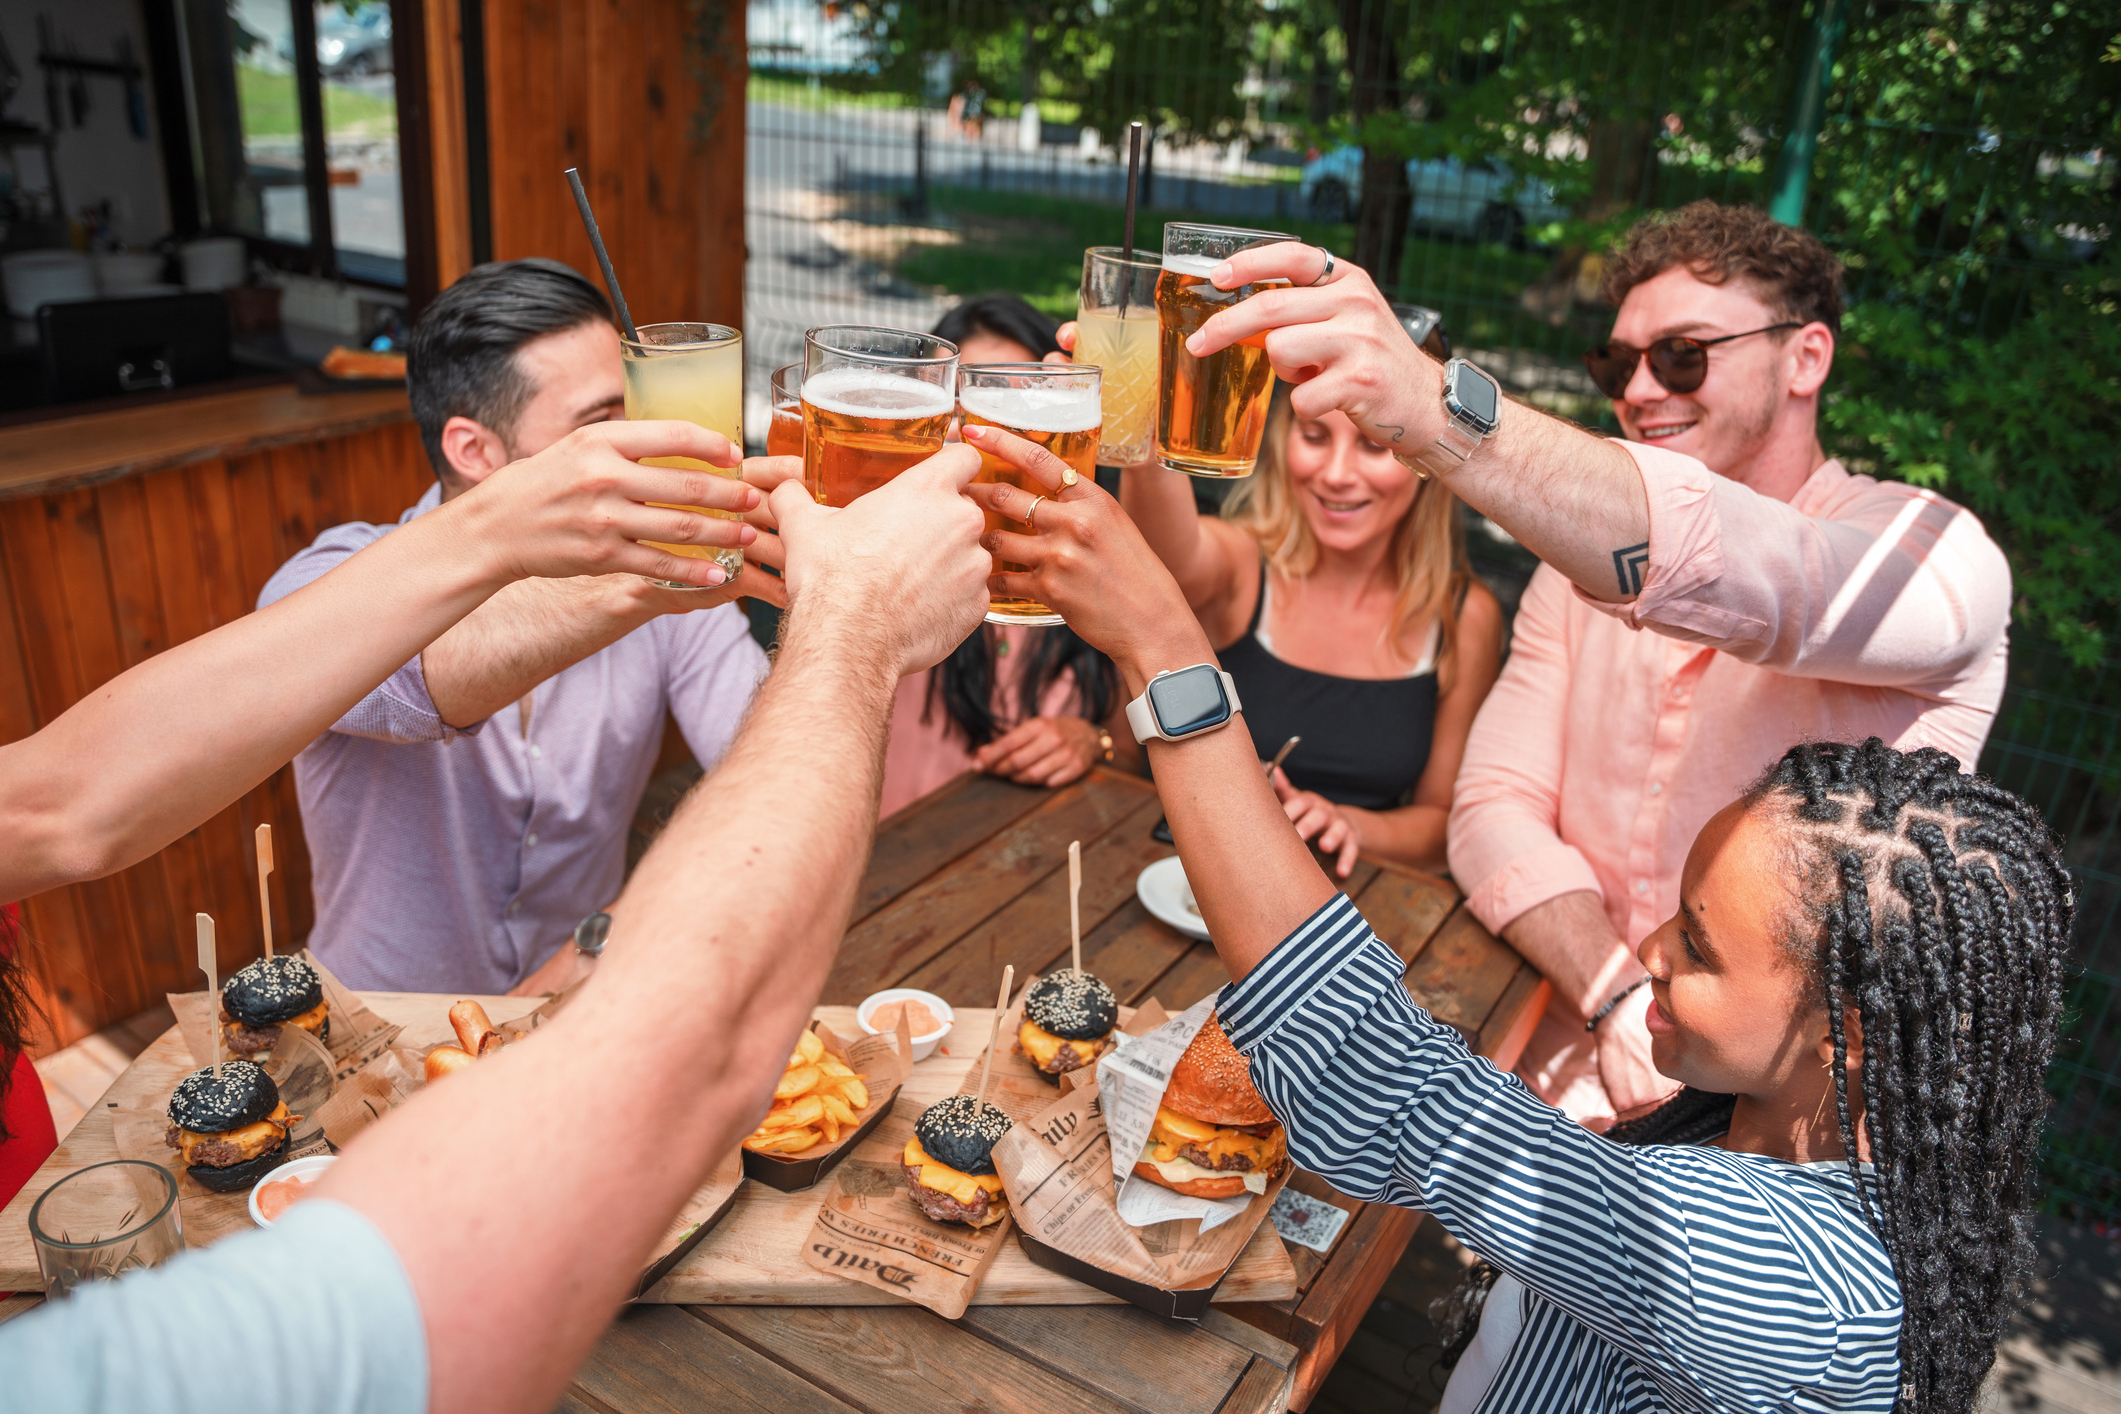 Group of friends toasting drinks at a casual outdoor dining setting